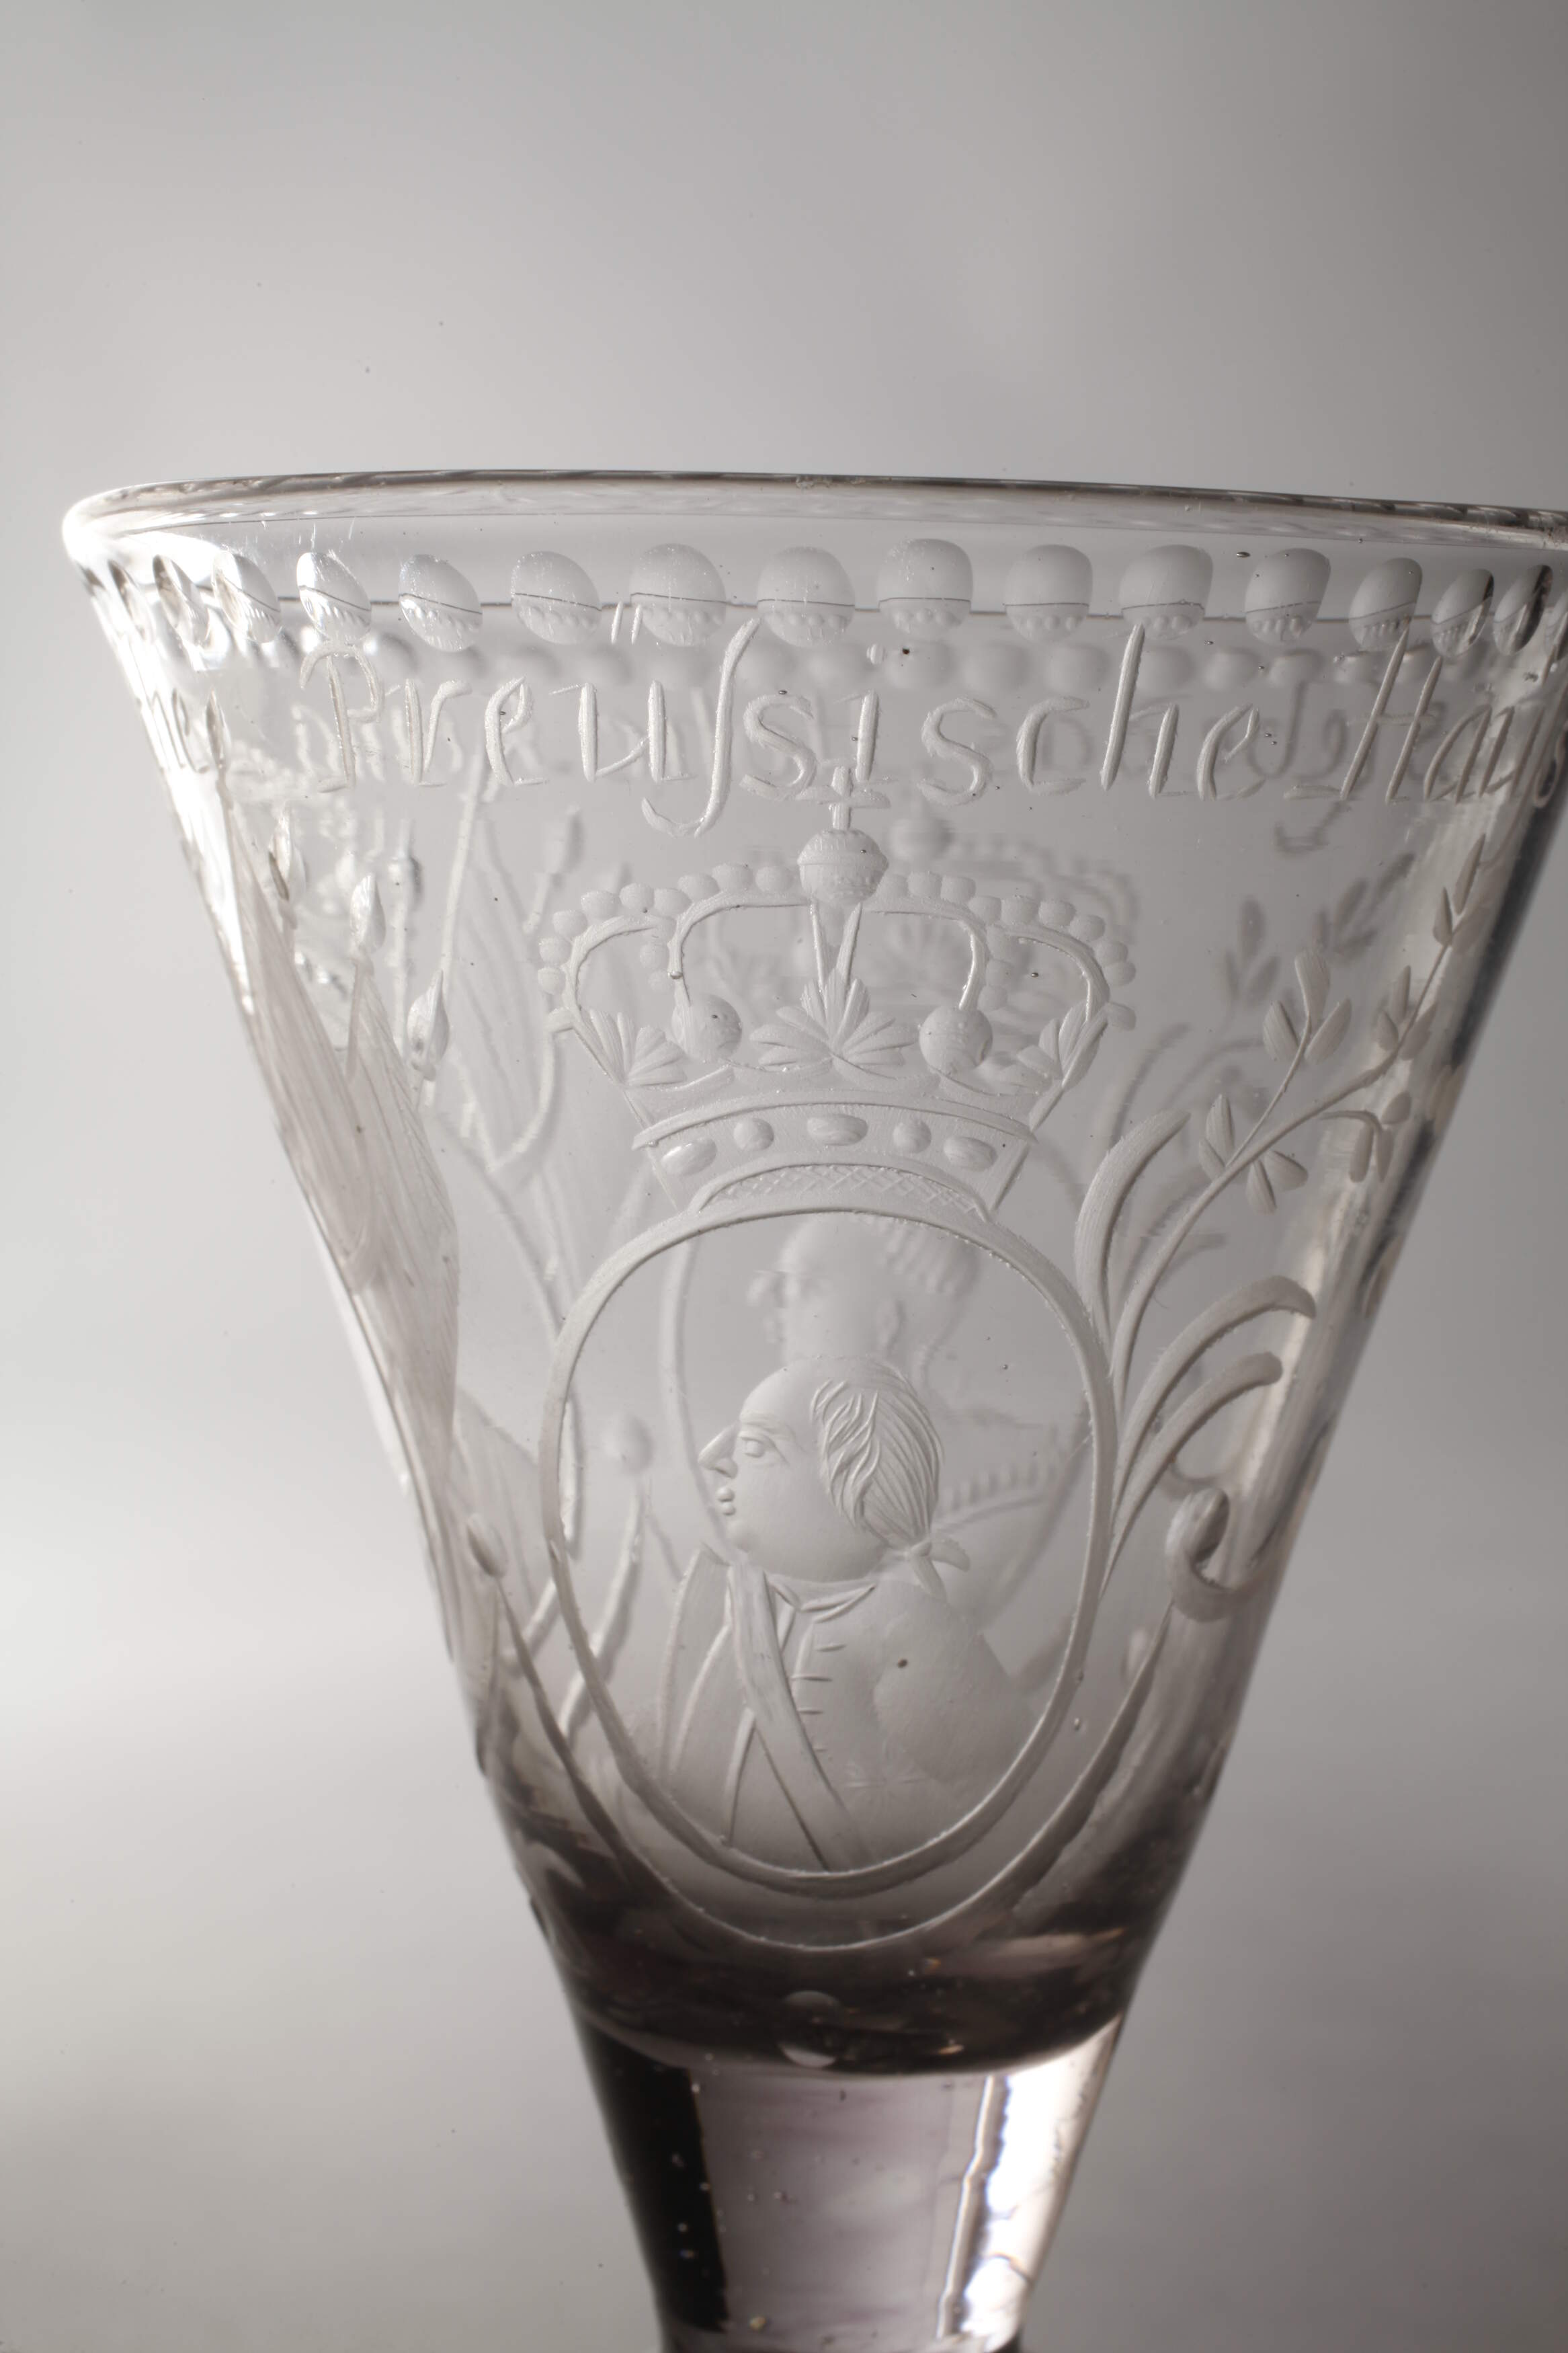 Spouted goblet from the Prussian royal house - Image 4 of 6